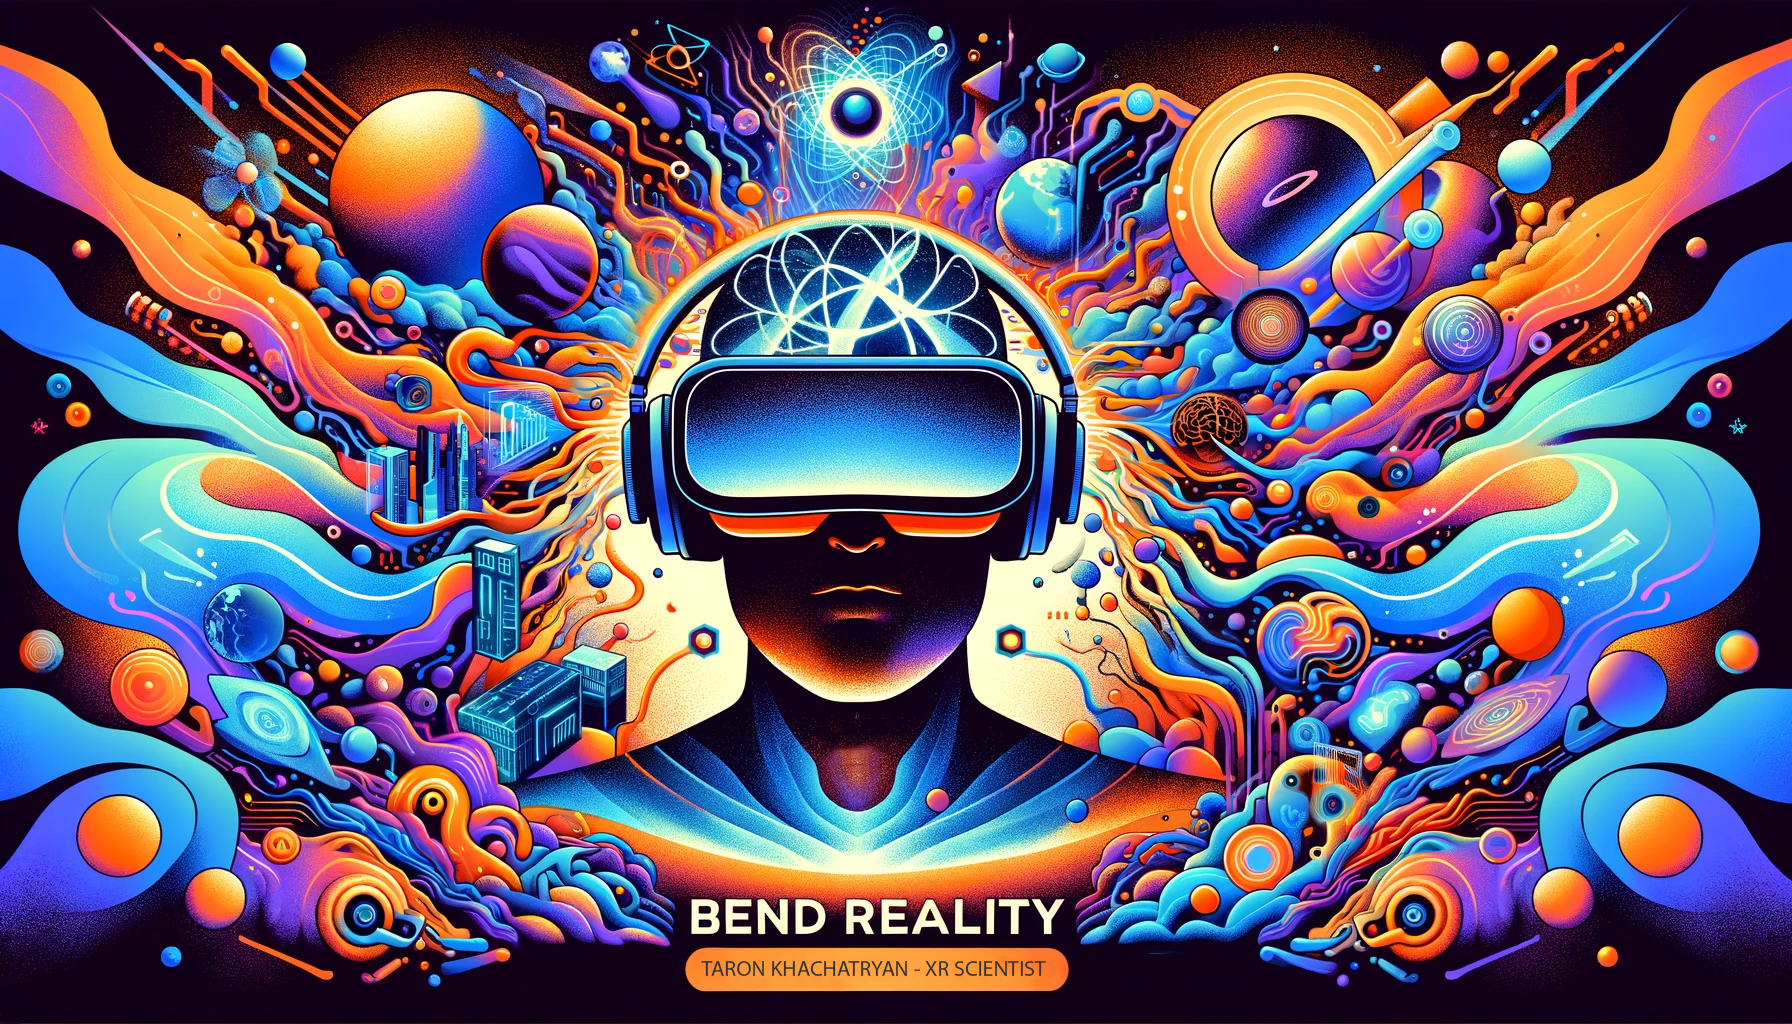 Maarten Witteveen: Input & Interactions in VR, AI, Startup, Consciousness | Bend Reality Podcast #1